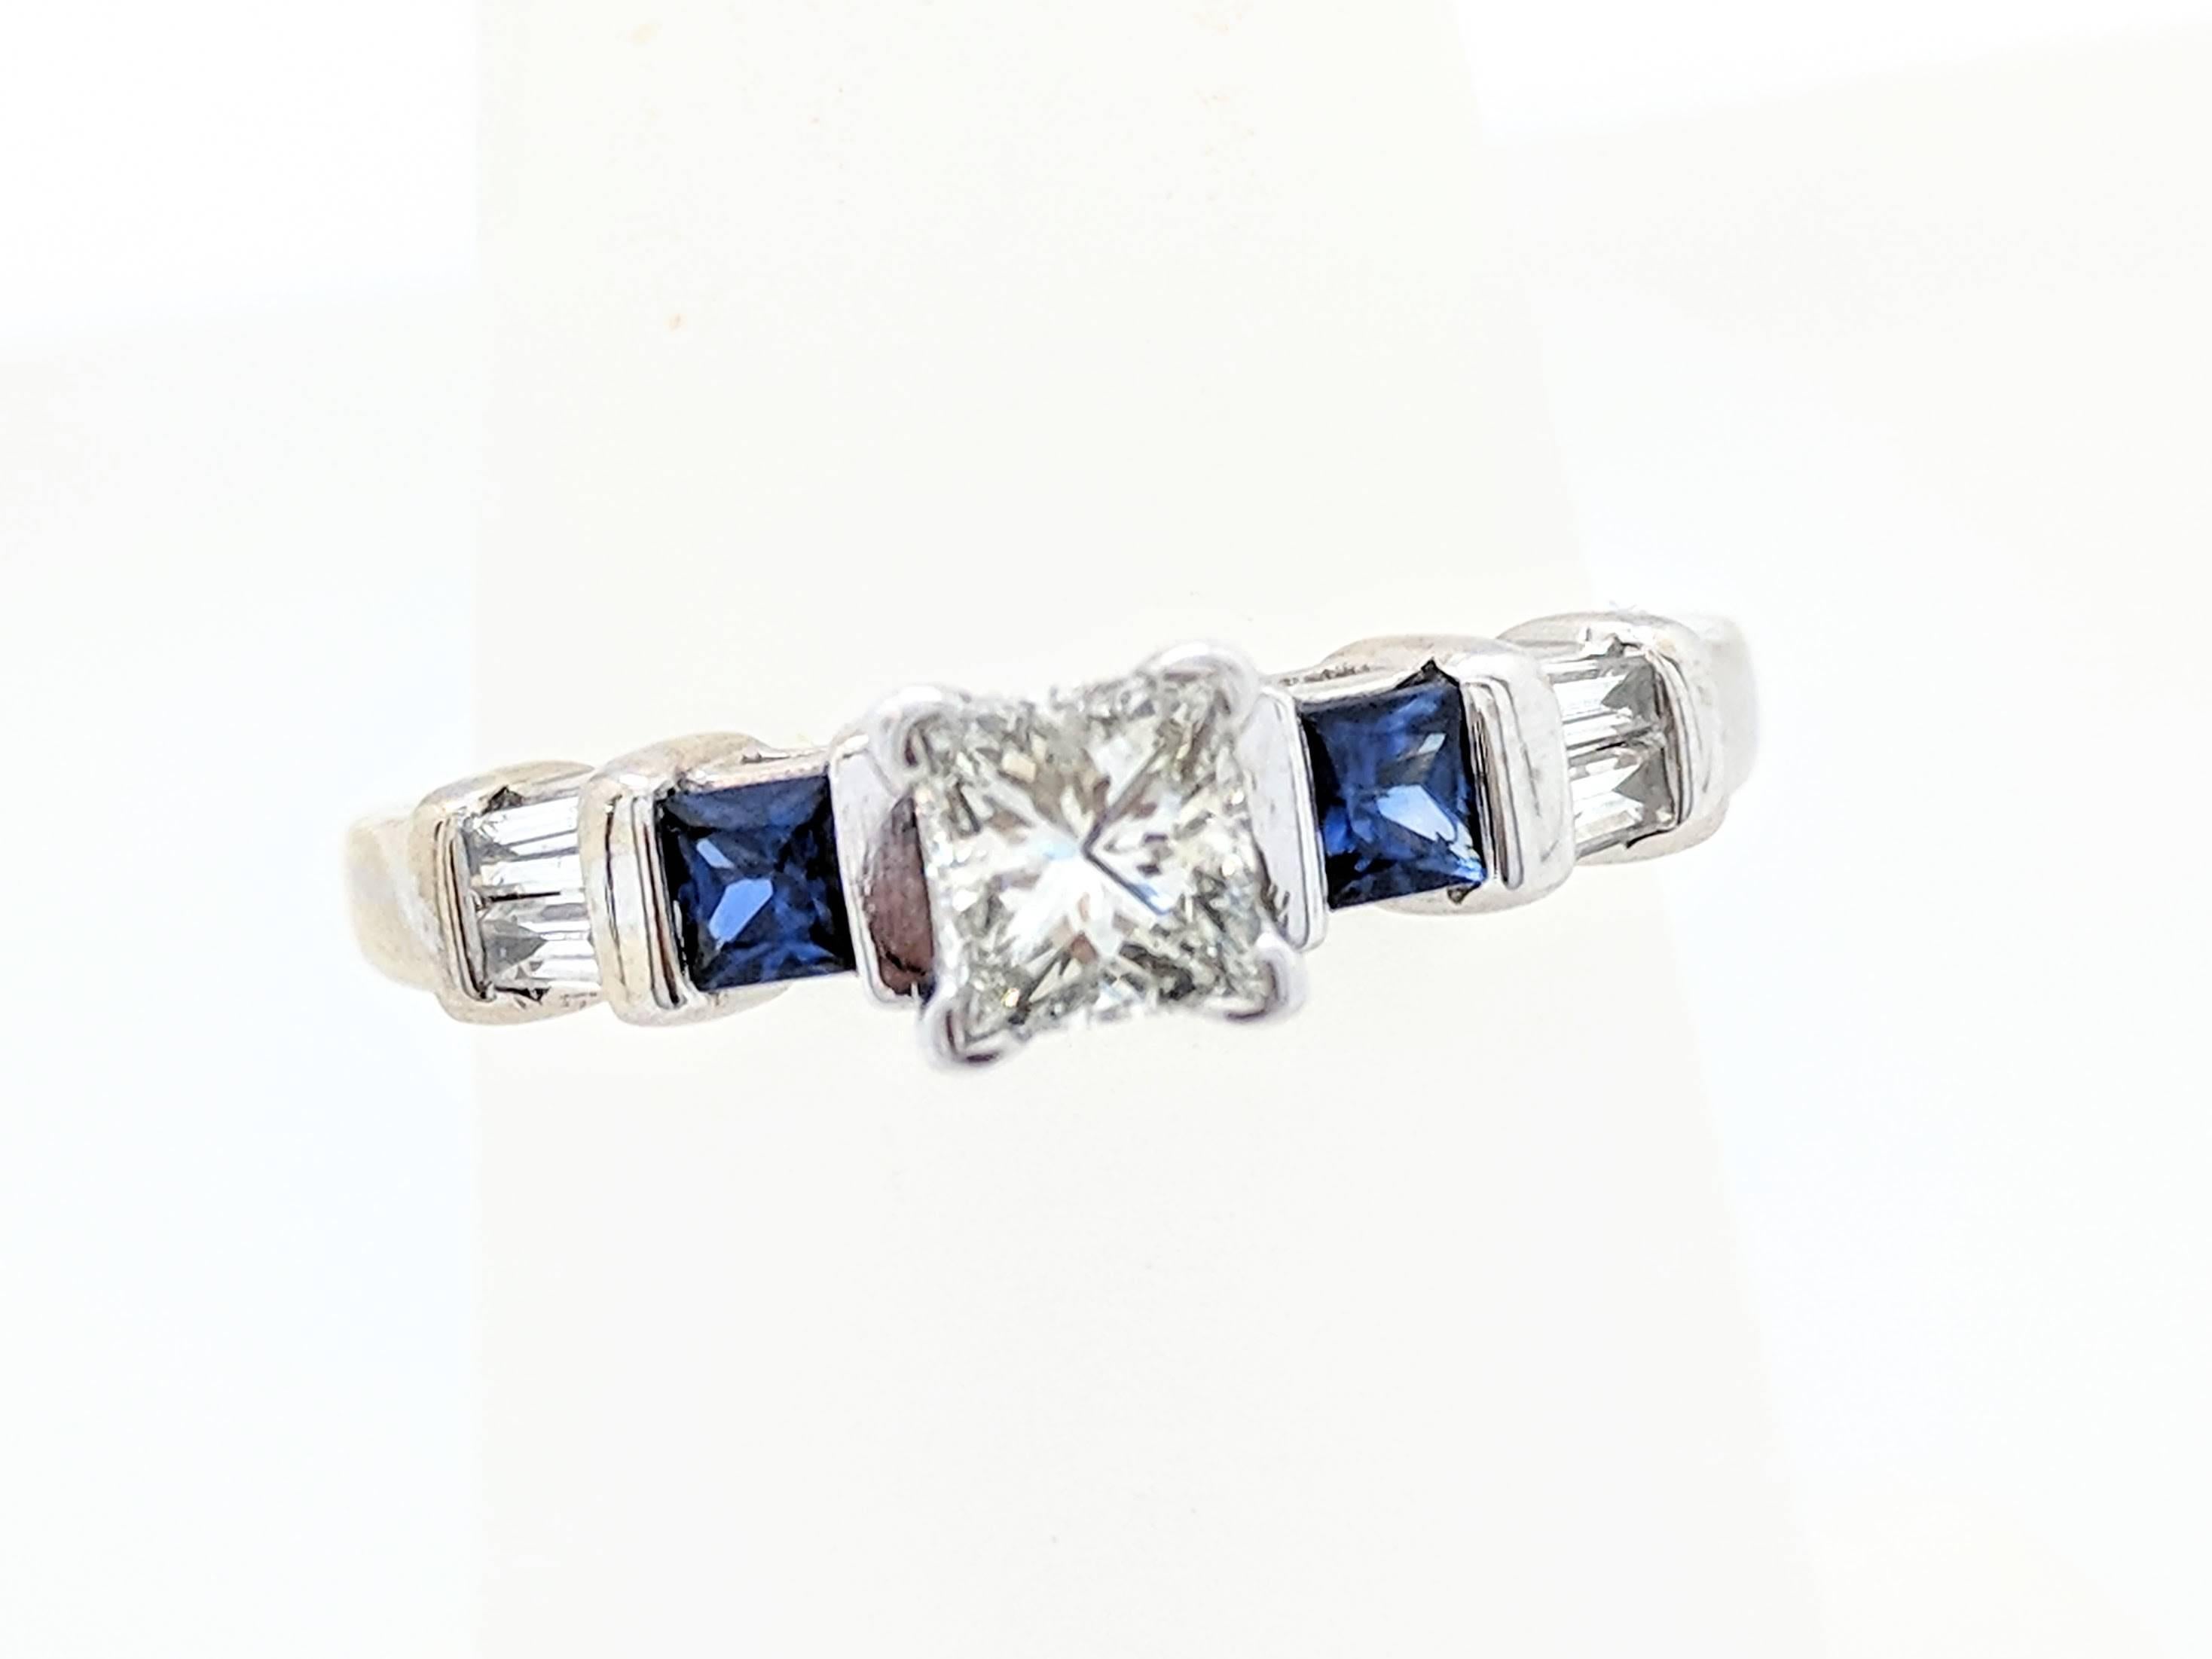  Ladies 10k White Gold .63ctw Diamond and Sapphire Engagement Ring Size 6.5

You are viewing a beautiful diamond and sapphire engagement ring. This ring is crafted from 10k white gold and weighs 3.6 grams. It features one (1) .35ct natural princess